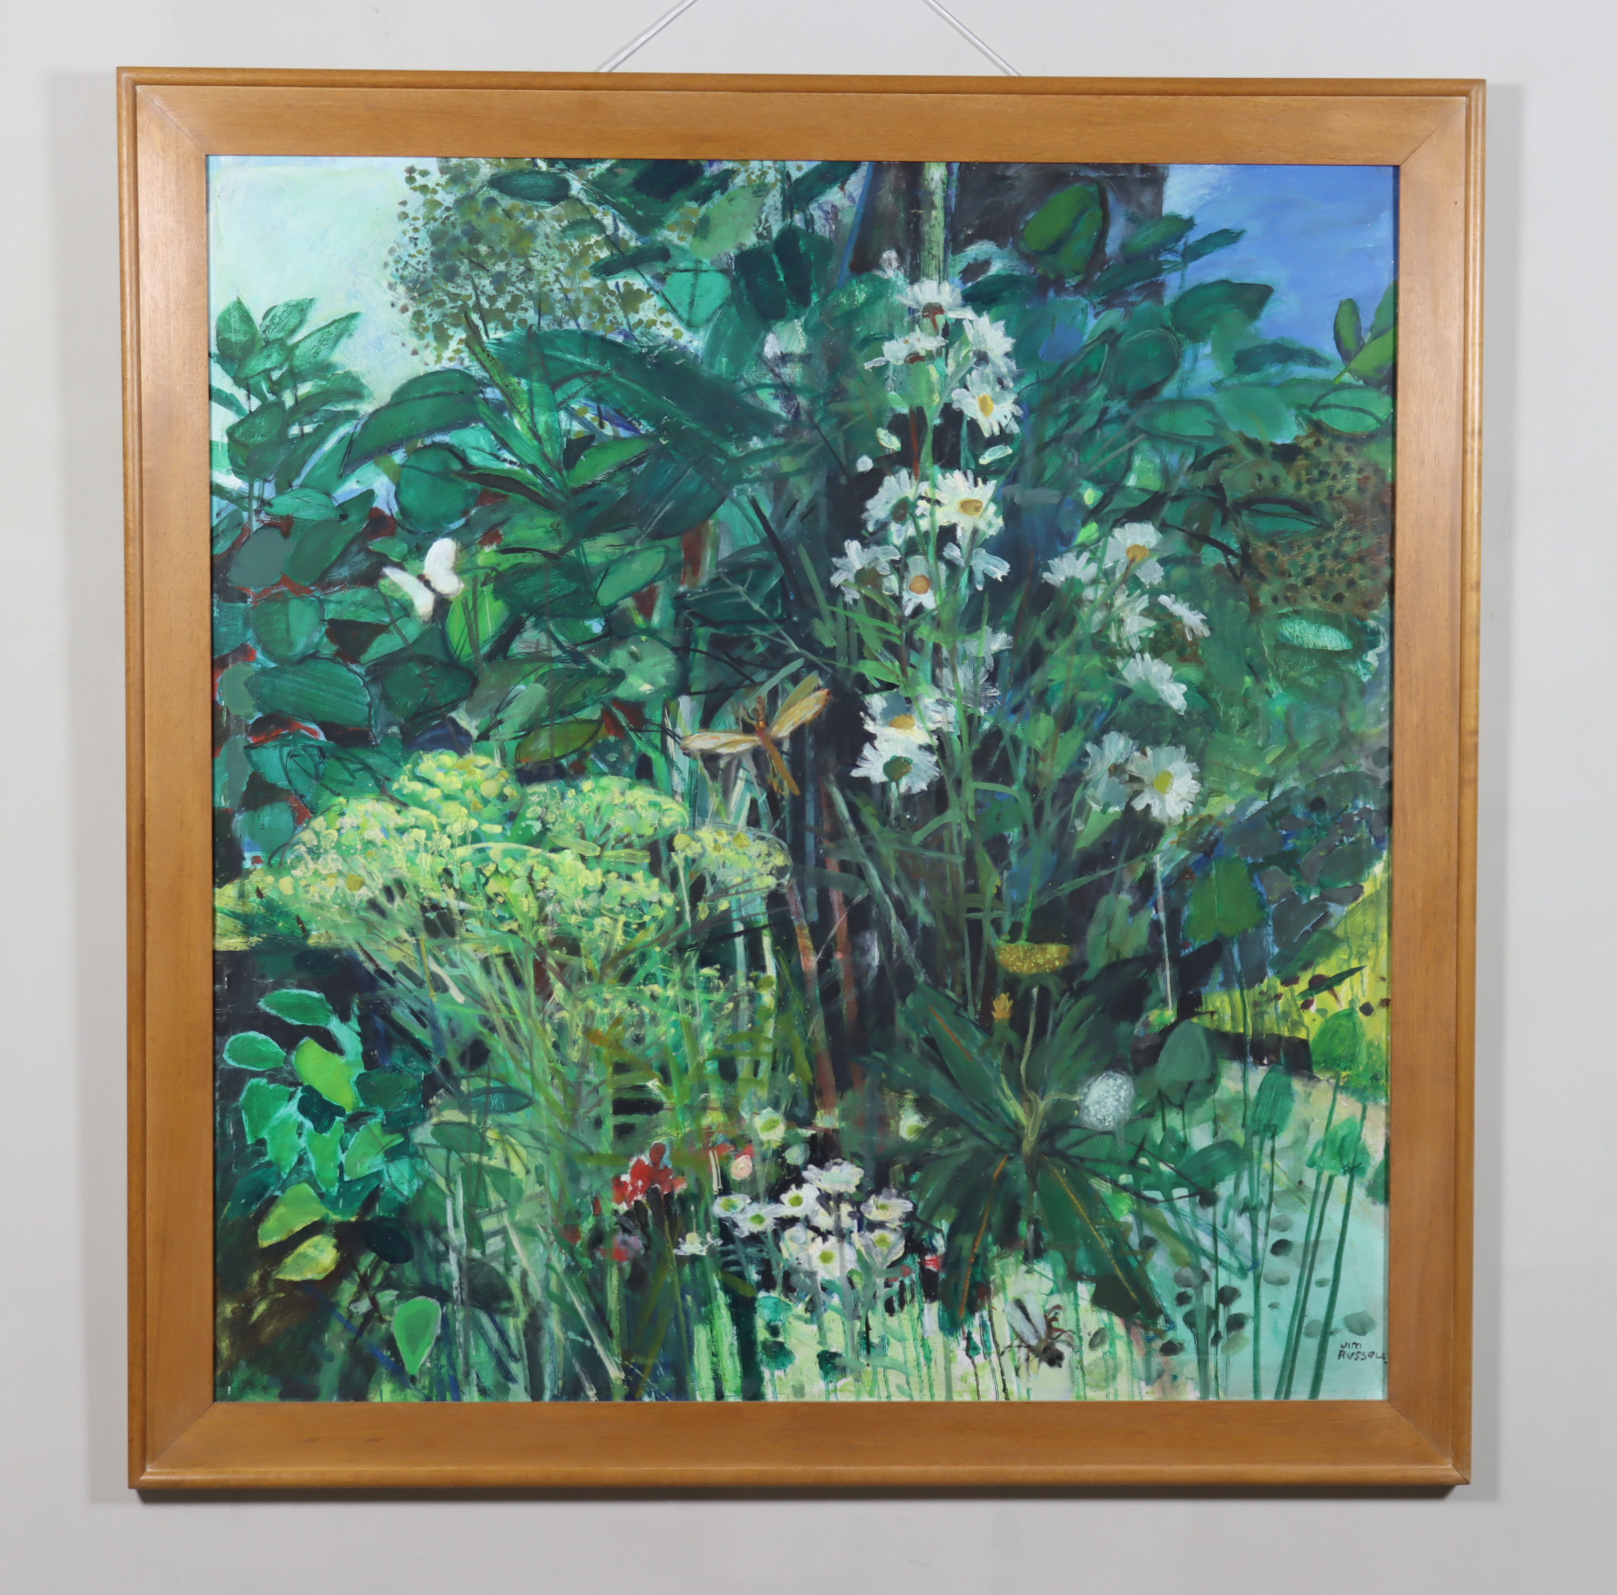 ***Jim Russell (1909-2001) - Oil painting - "Wild Flowers", signed, board 43ins x 41ins, framed - Image 4 of 4